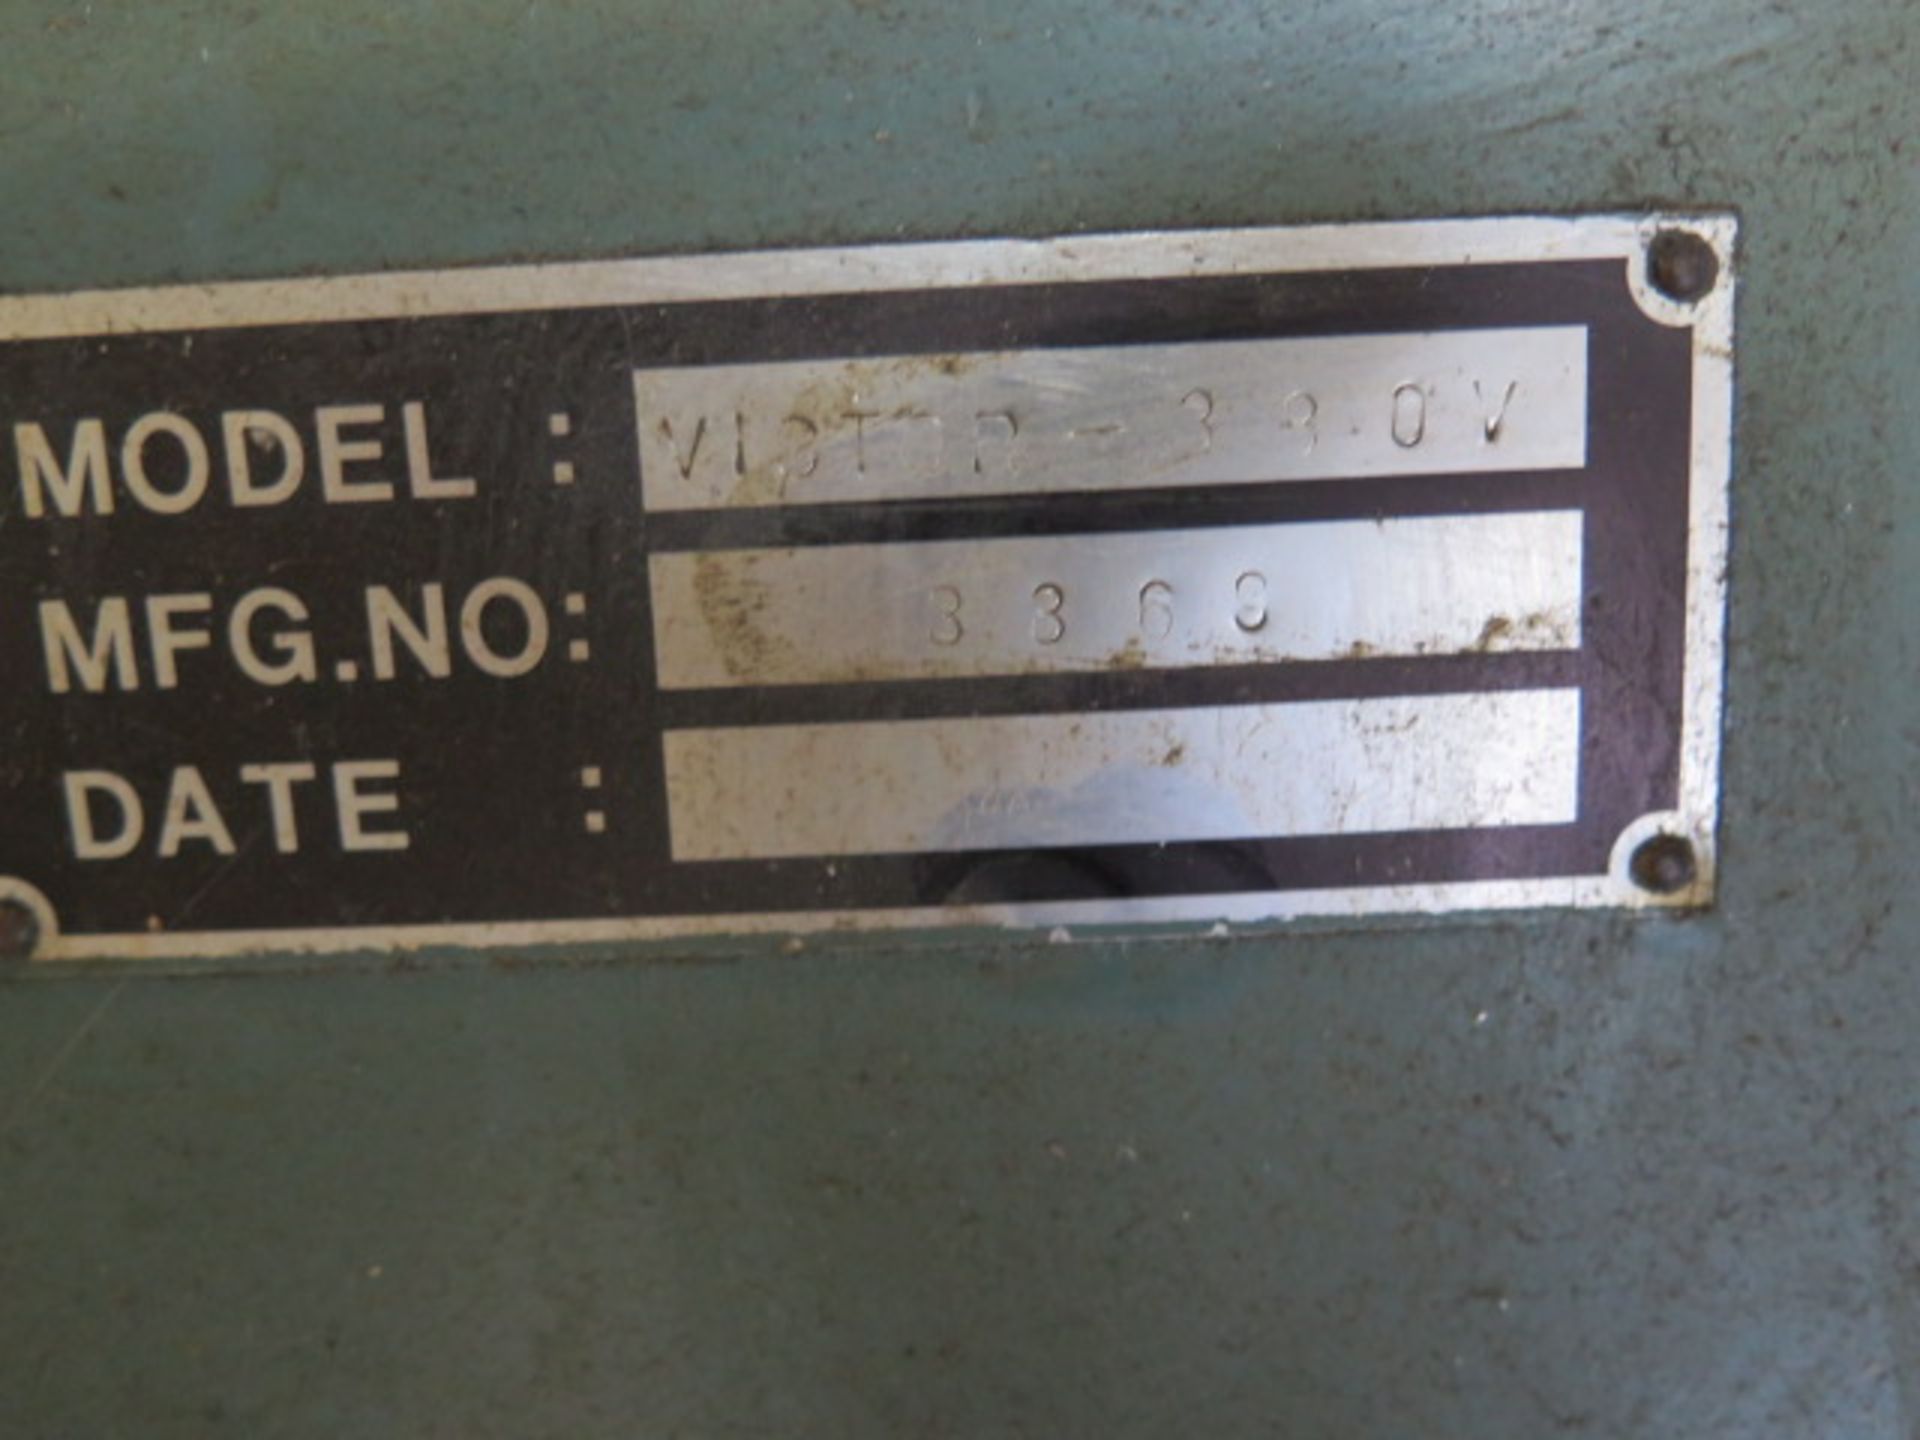 Victor mdl. VICTOR-330V Vertical Mill s/n 3369 w/ 3Hp, 60-4200 Dial RPM, Chrome Ways, SOLD AS IS - Image 12 of 12